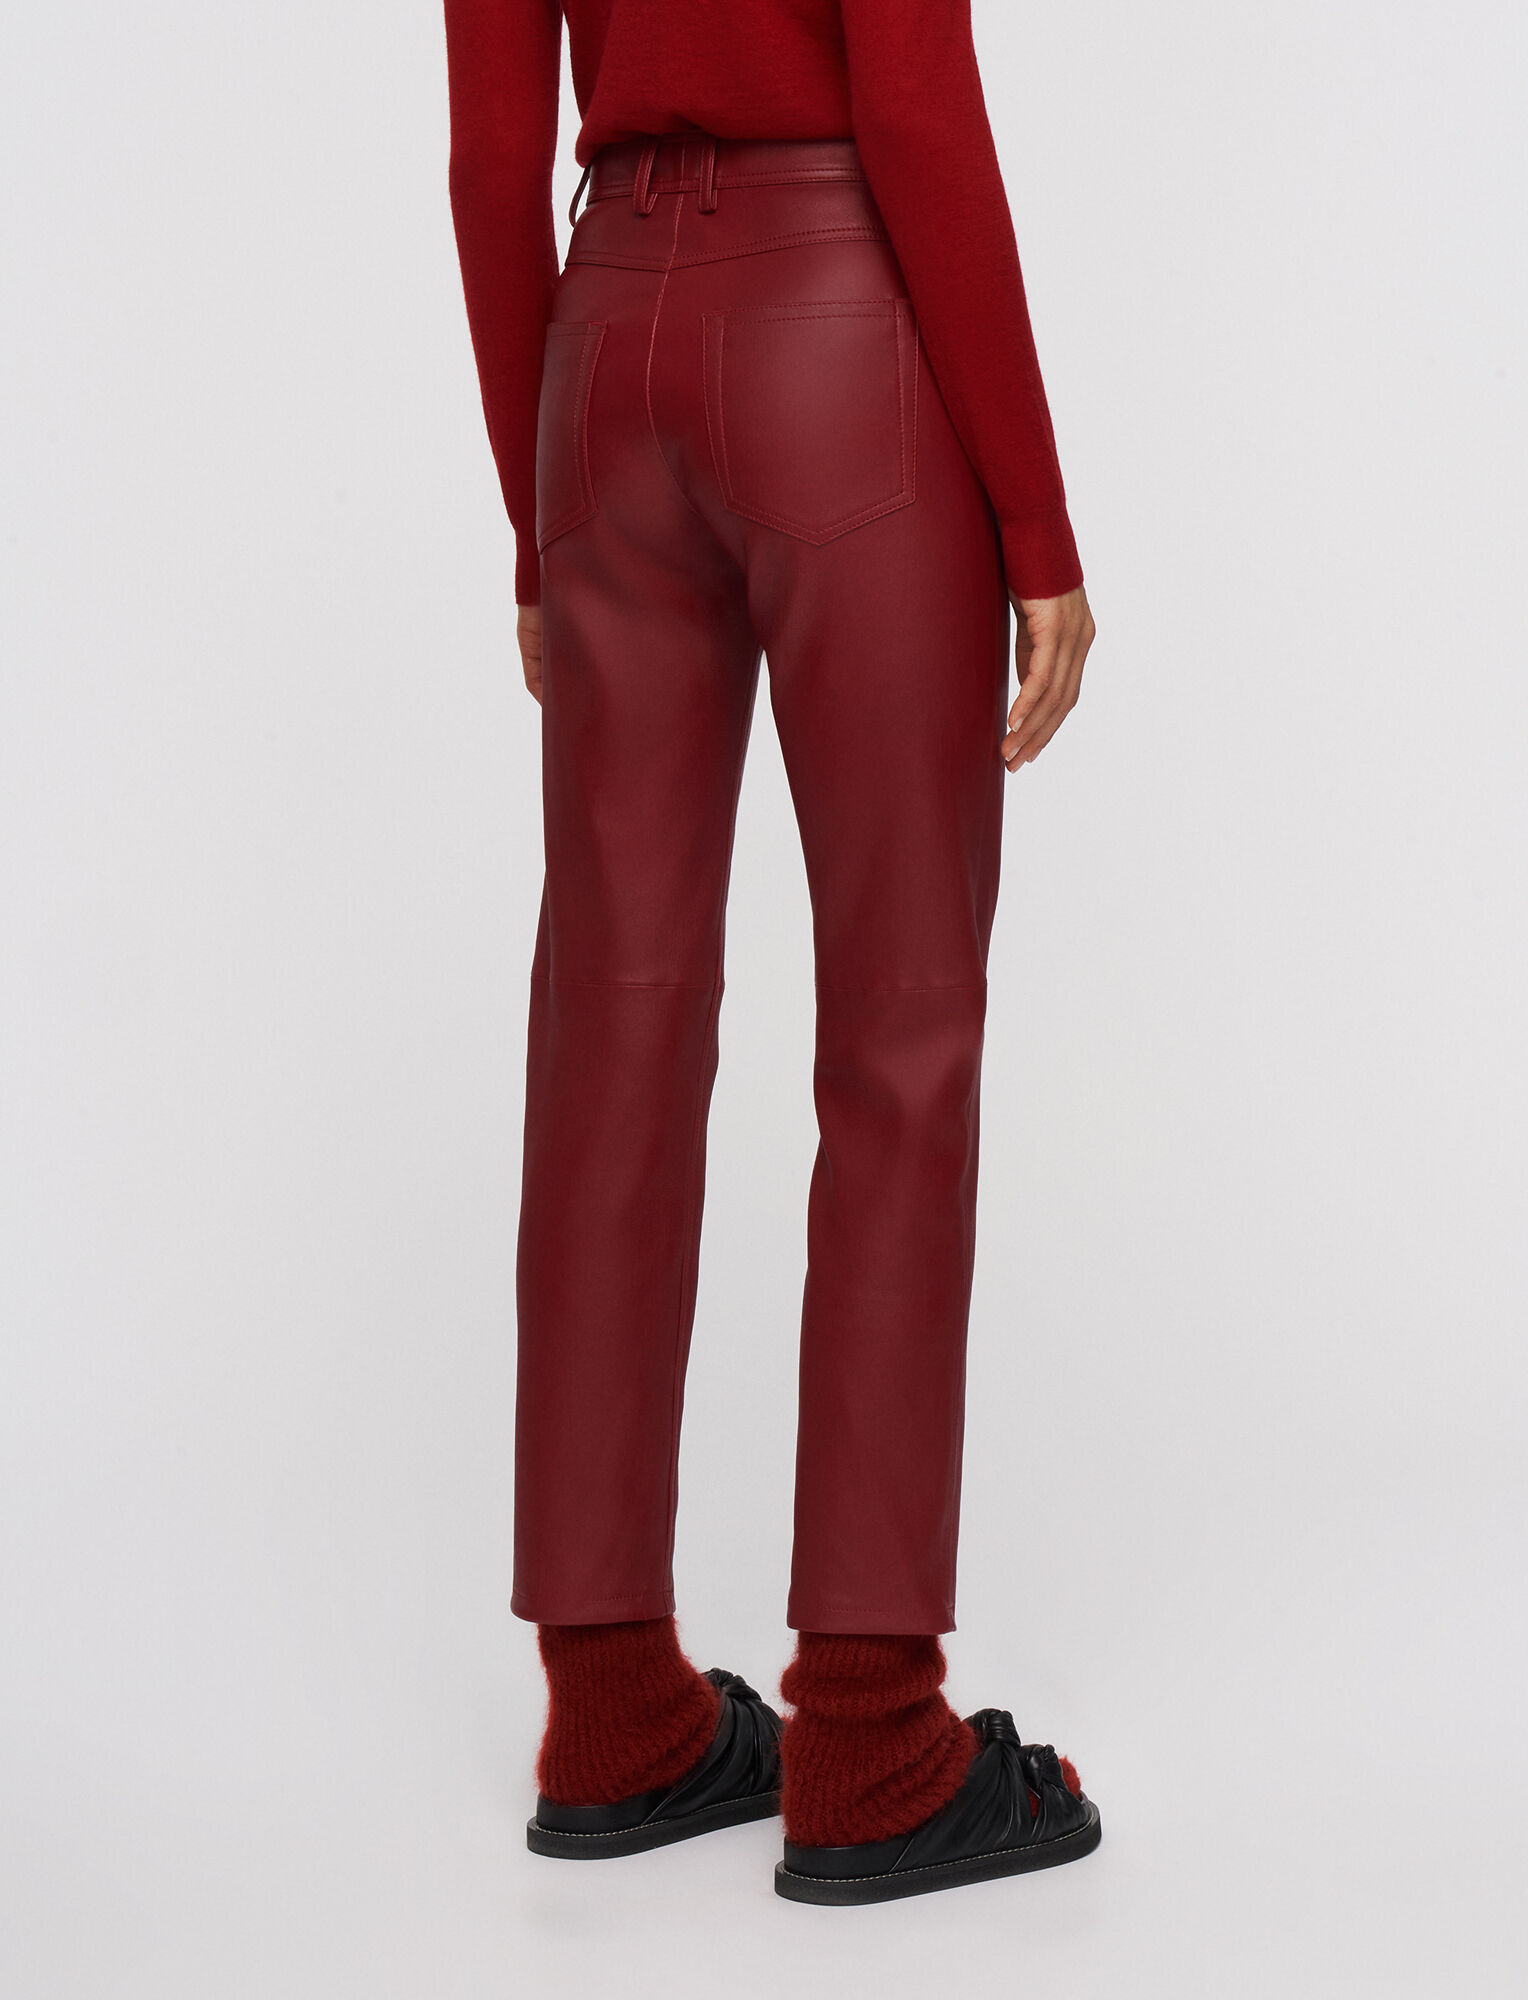 Joseph, Leather Stretch Teddy Trousers, in Syrah